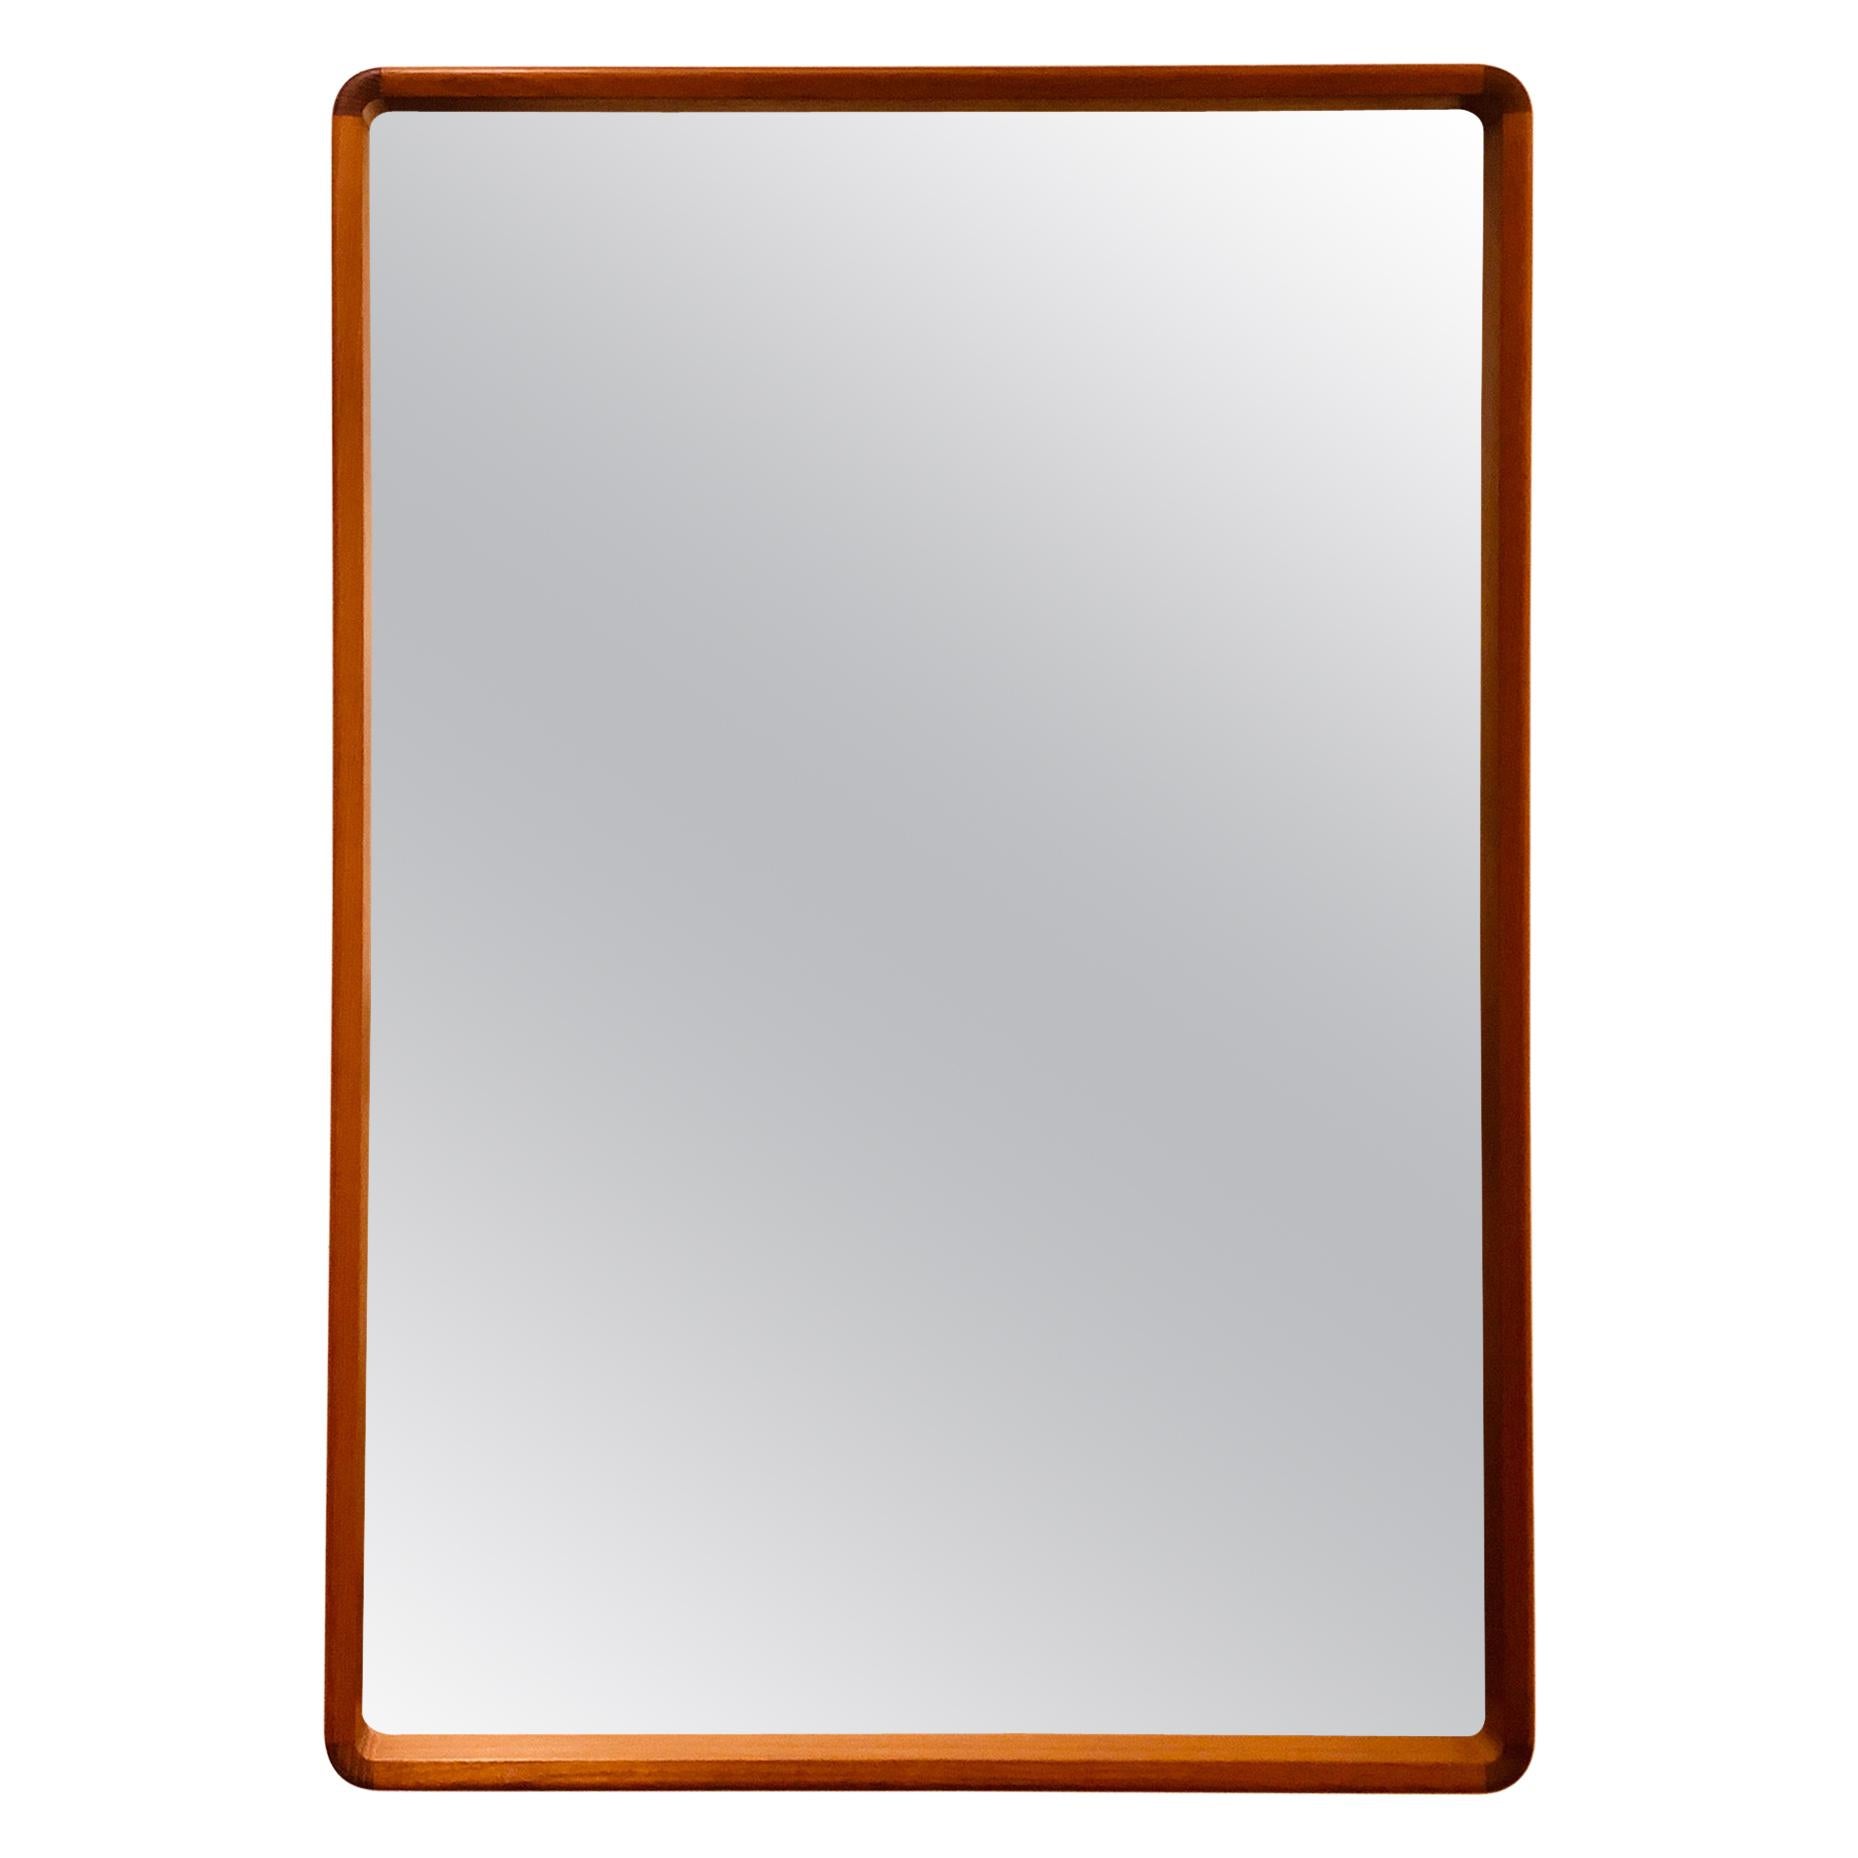 Danish Modern Solid Teak Mirror with Rounded Corners by Westnofa